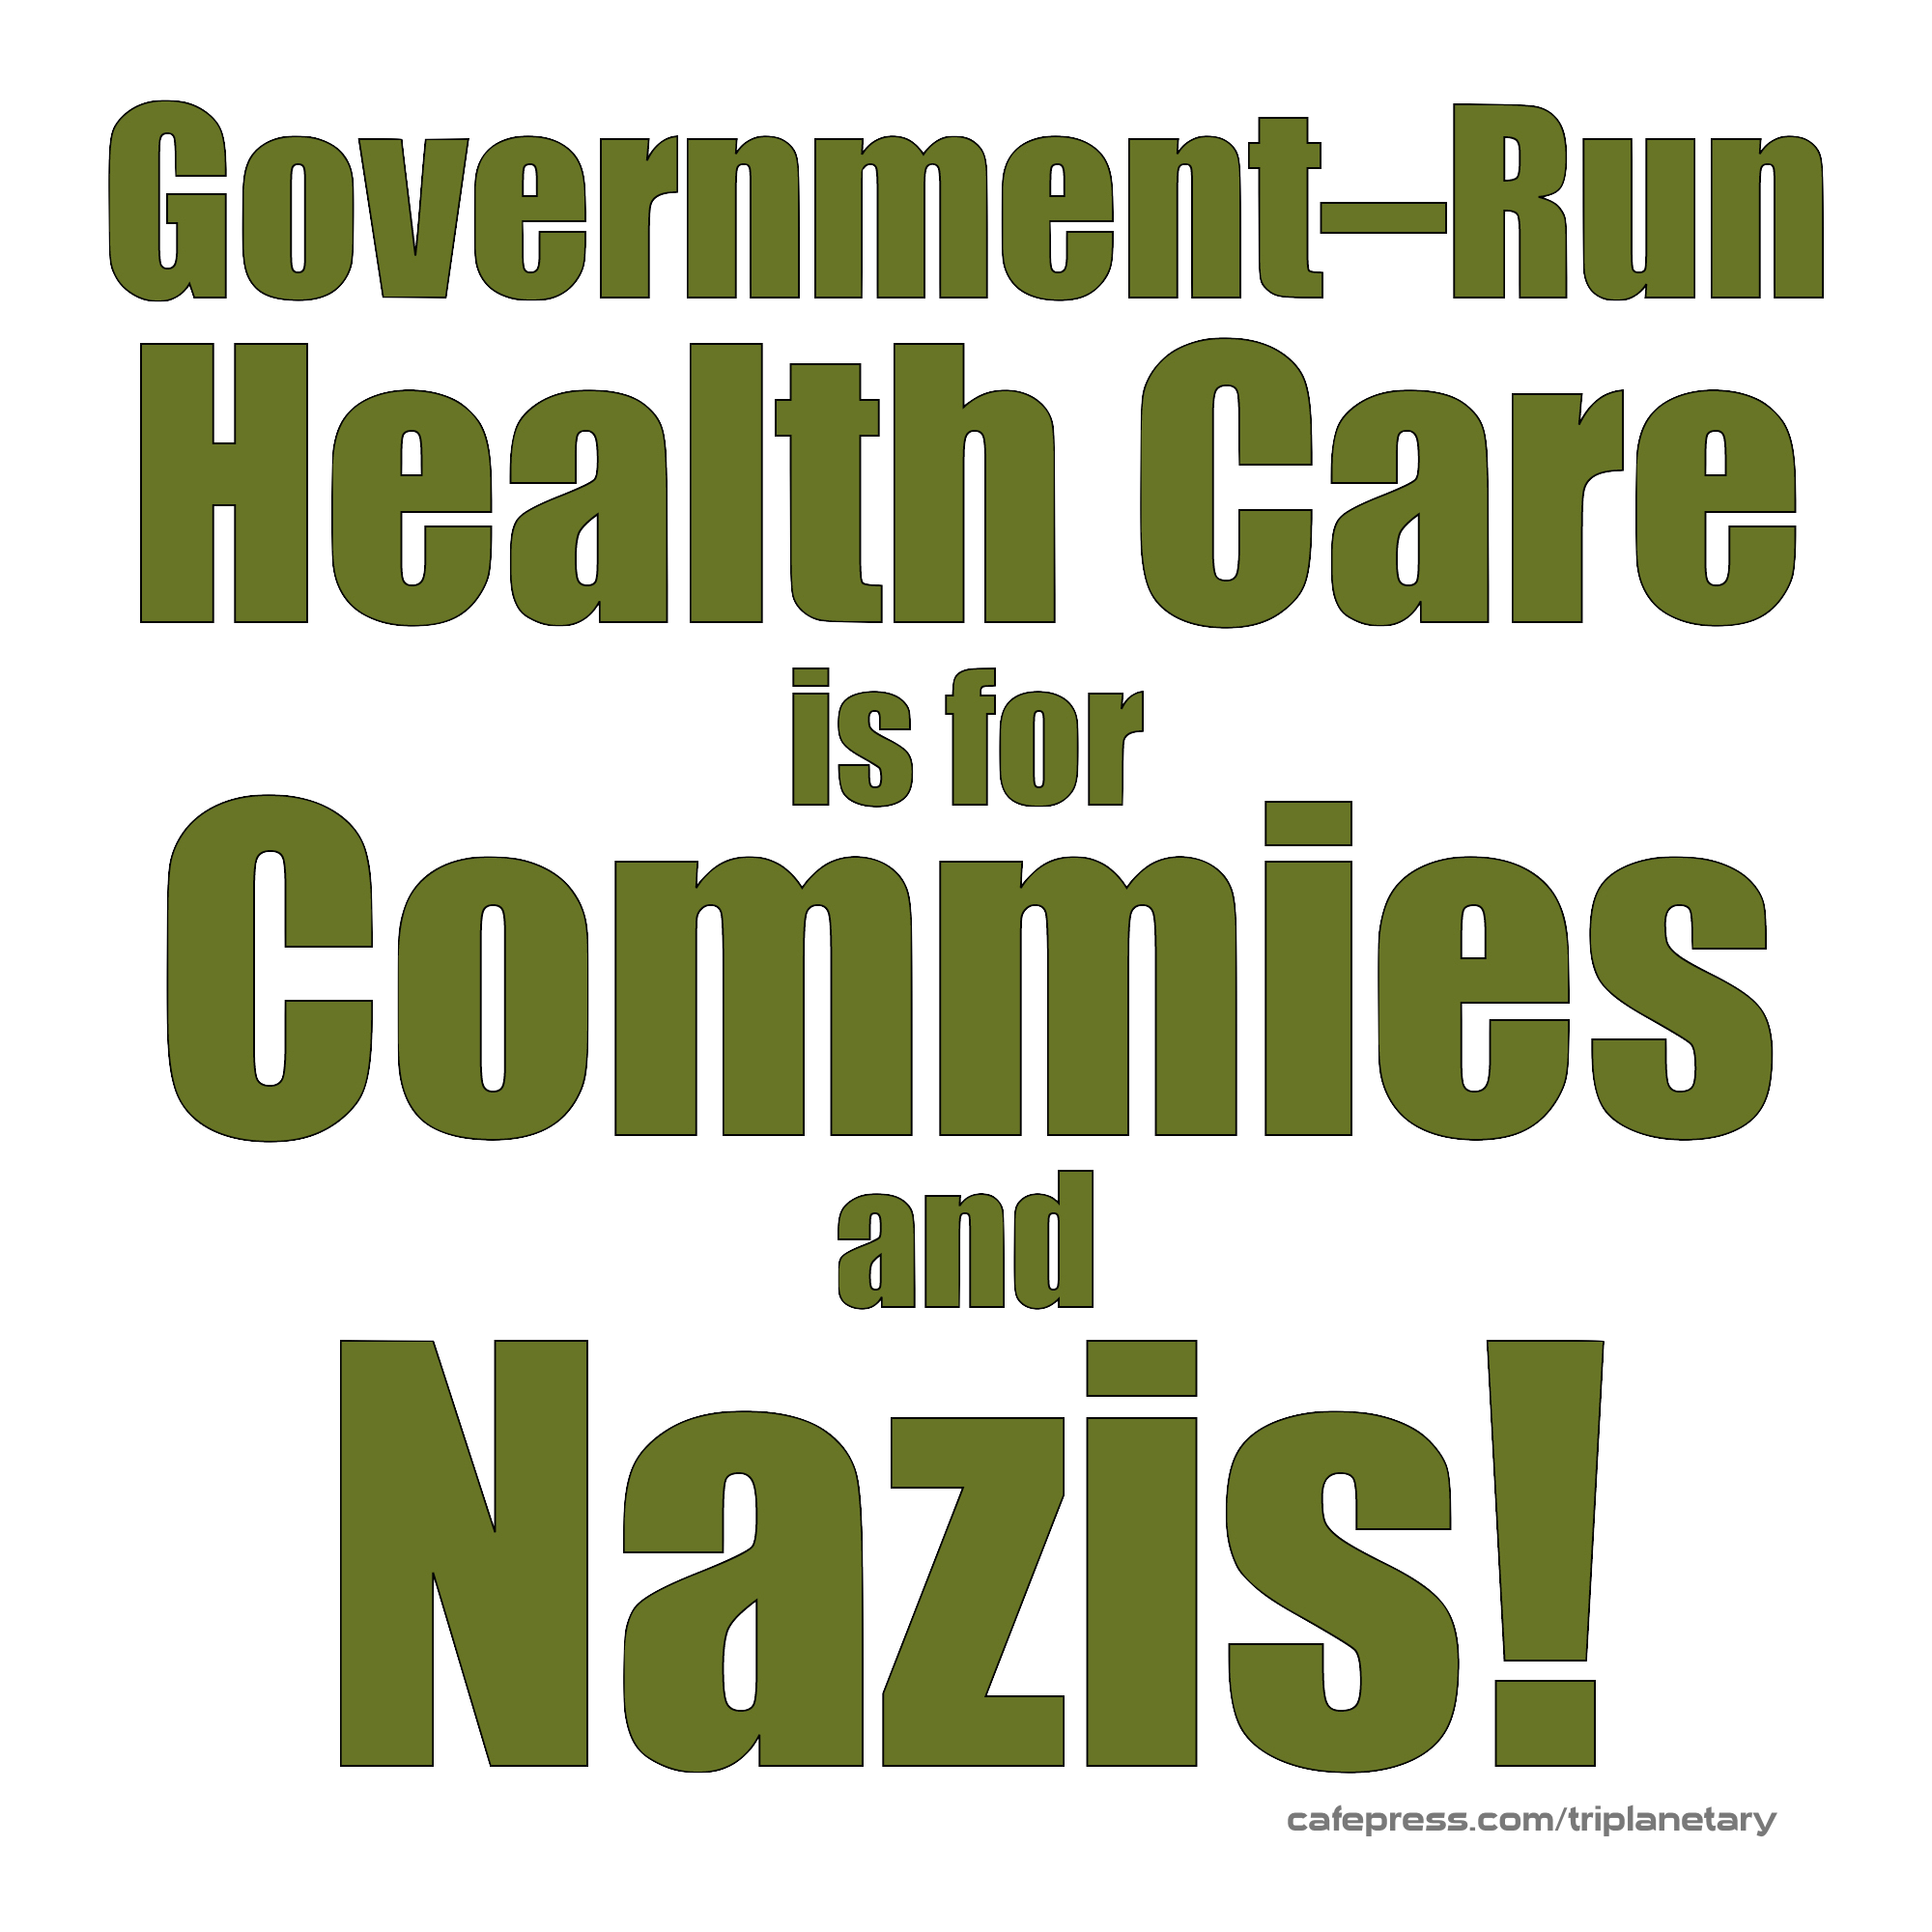 Olive-drab and white image reading 'Government-Run Health Care is for Commies and Nazis!'